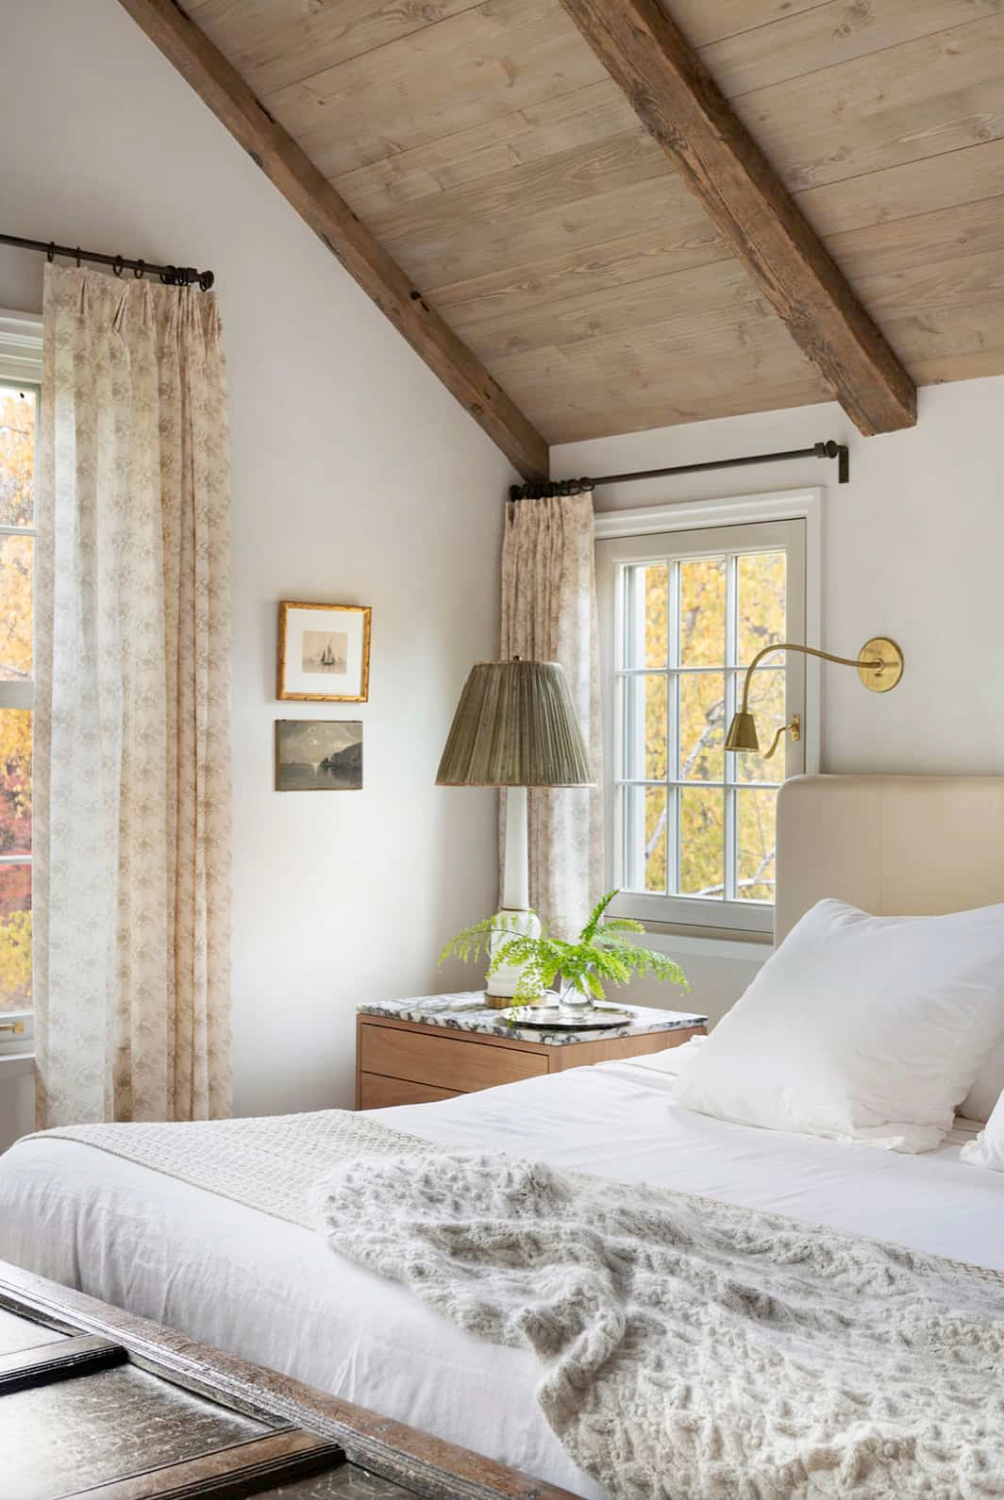 Rehkamp Larson Architects designed cozy European country cottage bedroom with wood ceiling and calm color palette. #europeancottage #cozybedrooms #timelessinteriors